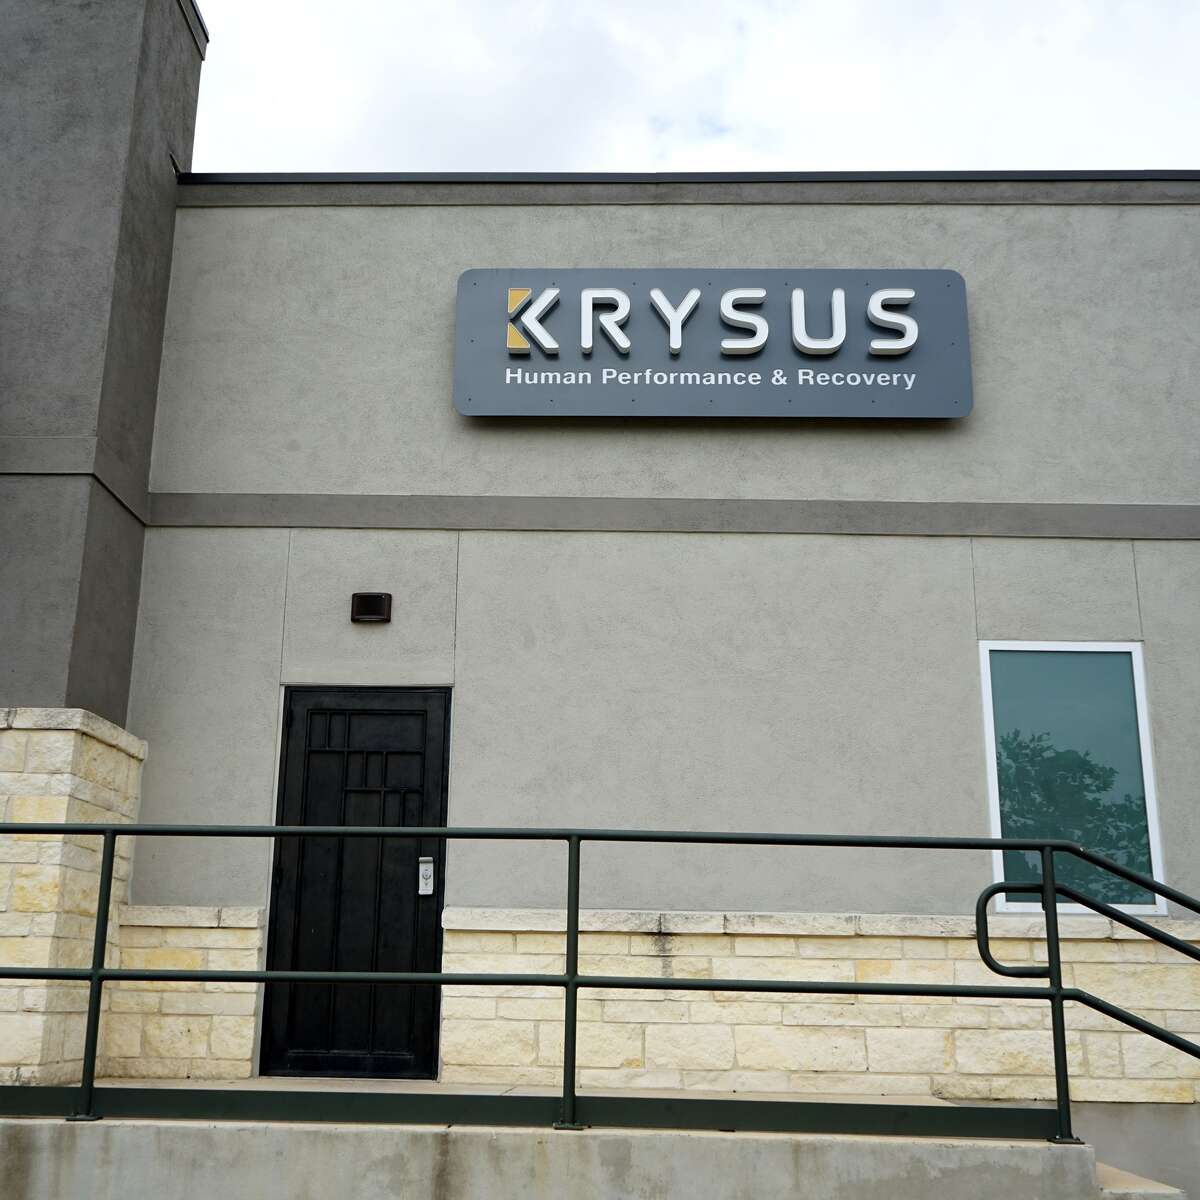 Krysus Human Performance is located on Lonestar Parkway at Alamo Ranch in far west San Antonio. It caters to athletes and military veterans, but also has a menu of treatments for regular people looking to de-stress, relax, and become their best self. “You can tell the difference between when somebody walks in - the stress and kind of what they look like and maybe sometimes pain they are experiencing. When they leave, totally different person,” said Latina Isaacks, co-founder and CEO of Krysus.